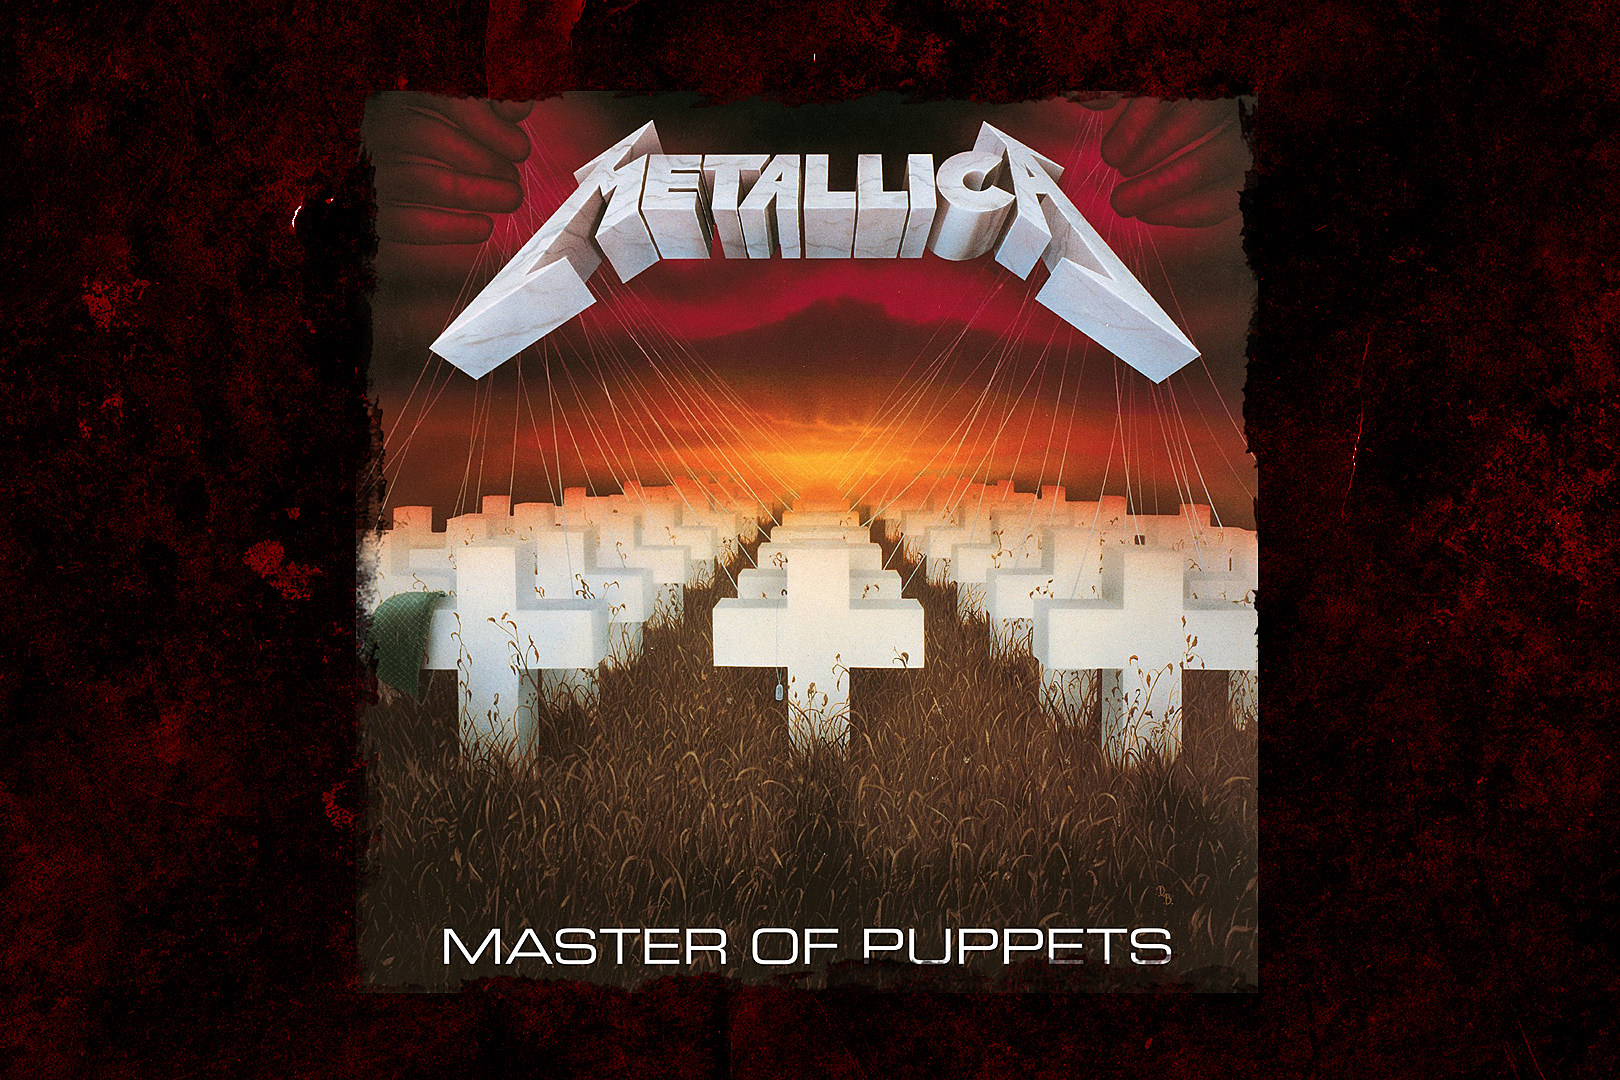 37 Years Ago: Metallica Release ‘Master of Puppets’